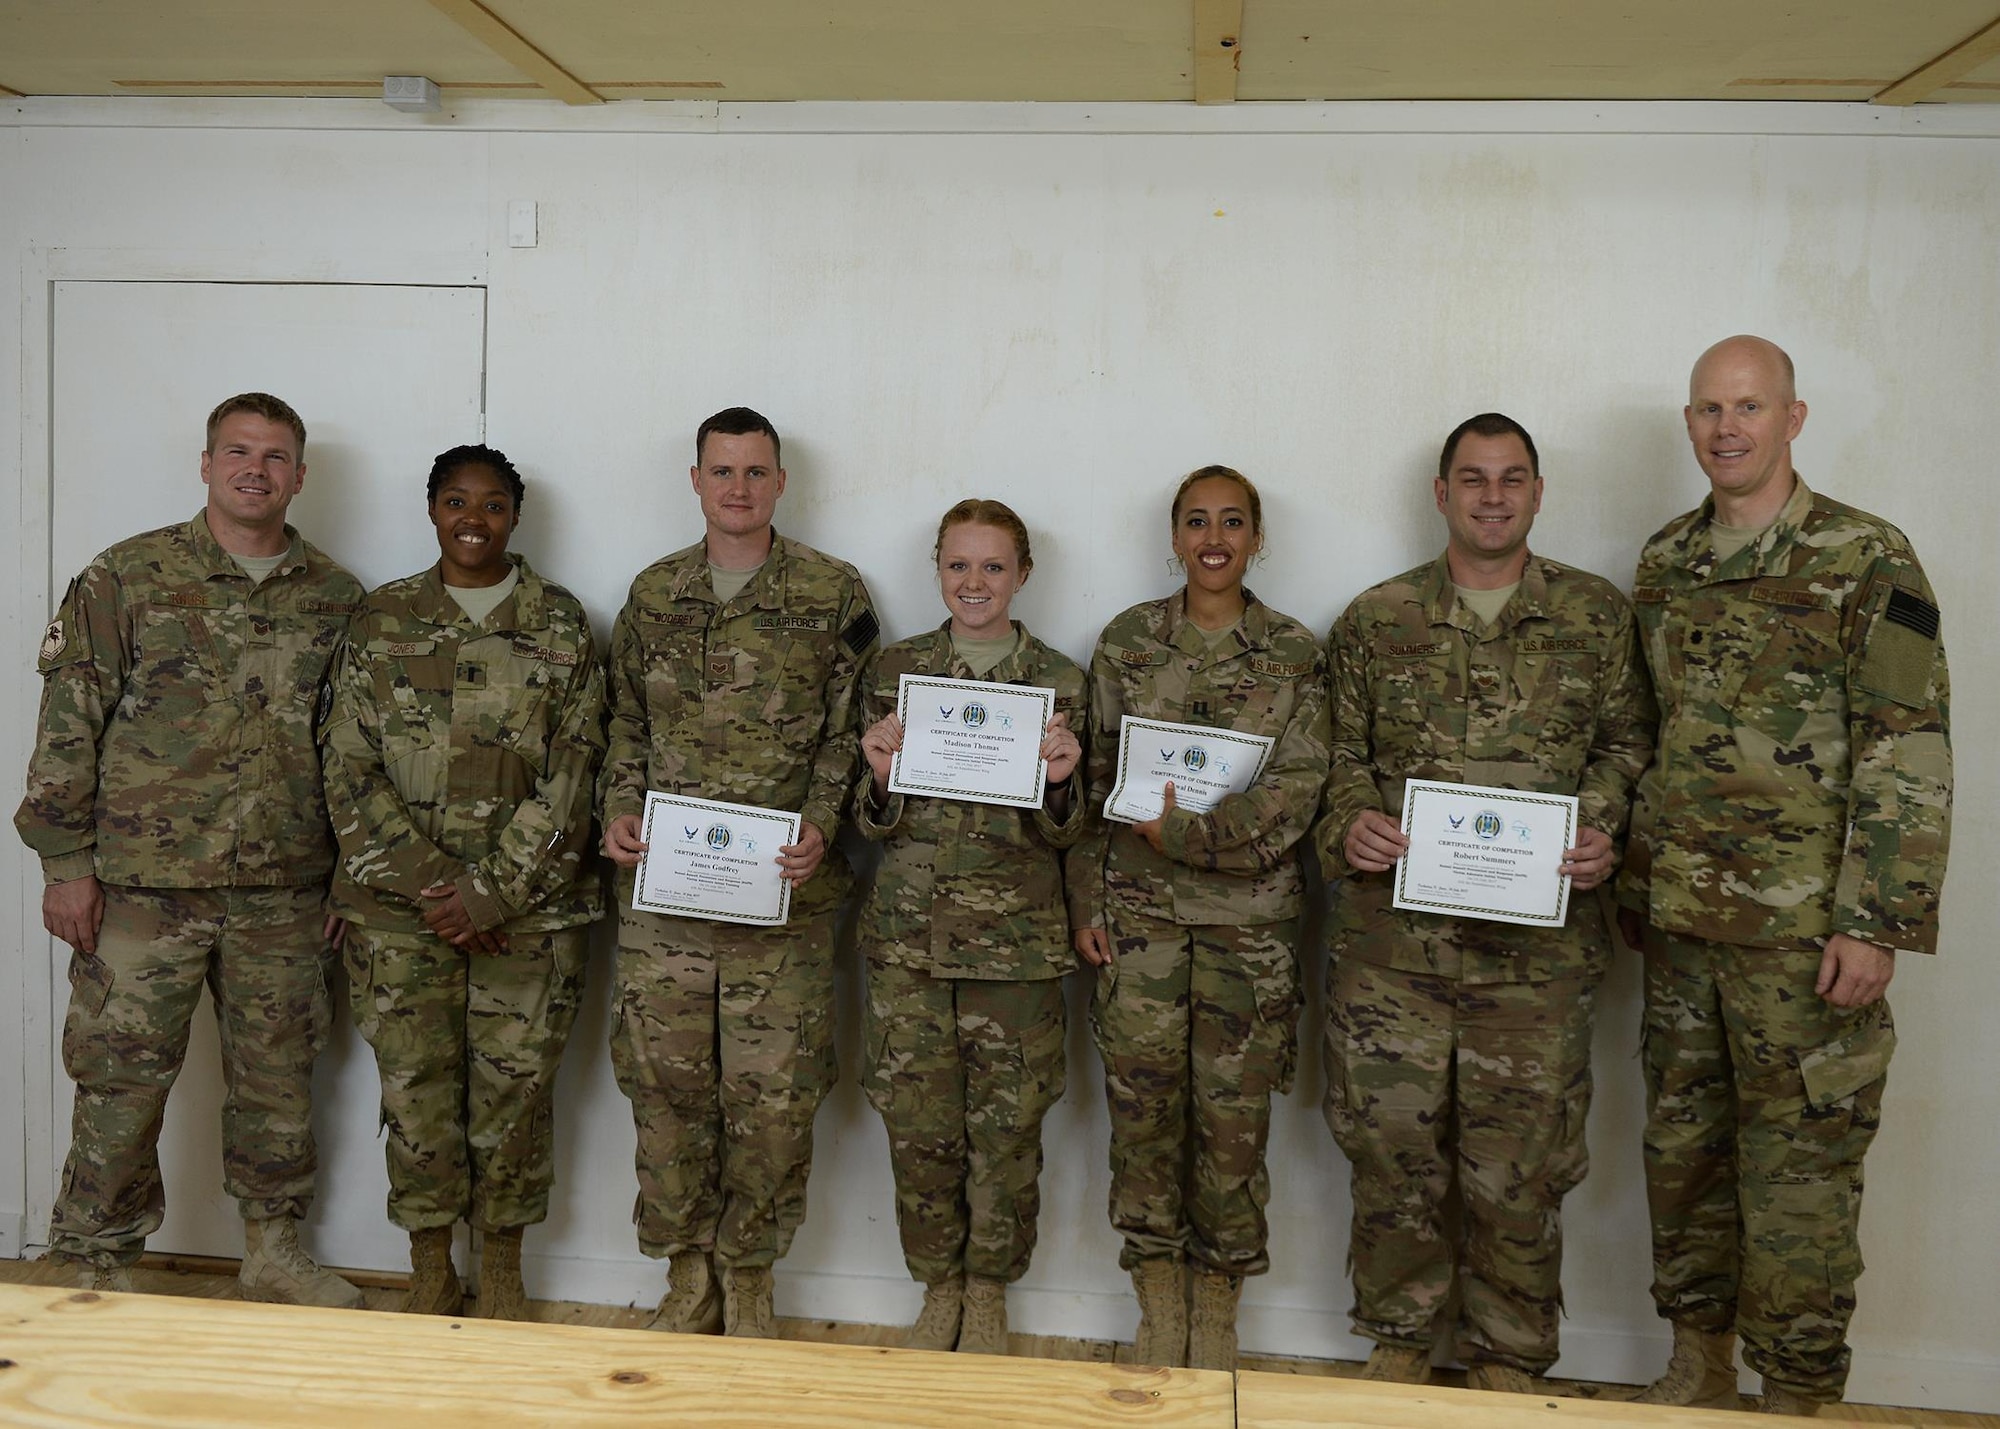 Deployed Airmen show off their training certificates with their unit leadership after completing a 40 hour Sexual Assault Prevention and Response Victim Advocate Training Program at an undisclosed location, East Africa, July 14, 2017. Victim advocates are the representation of the SAPR program for the Sexual Assault Response Coordinator and are liaisons between victims and the SARC. (U.S. Air Force photo by Senior Airman Jimmie D. Pike)